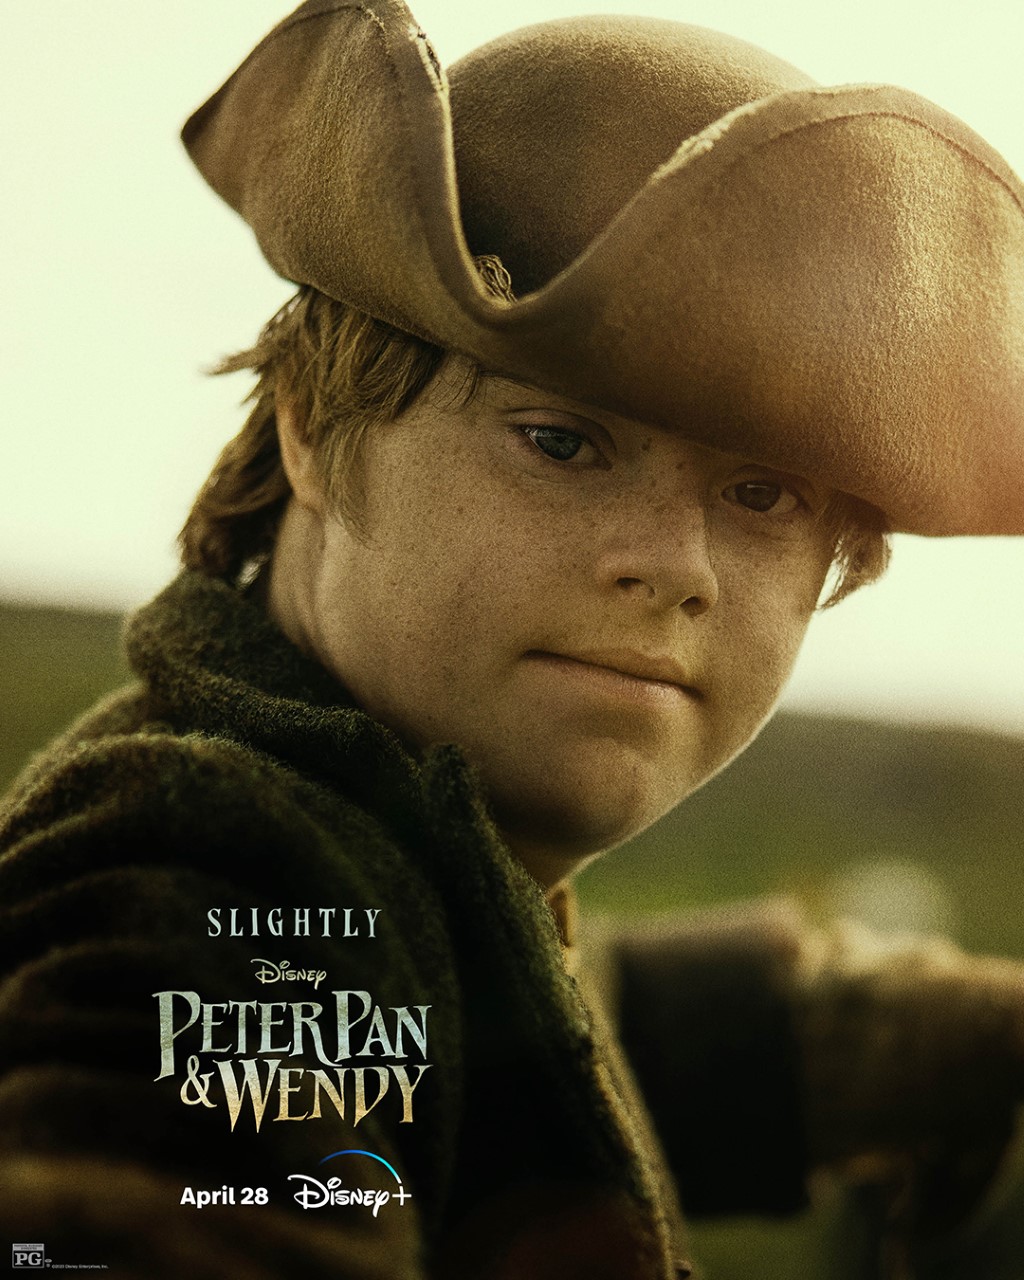 Noah’s starring role in Peter Pan movie Amaze